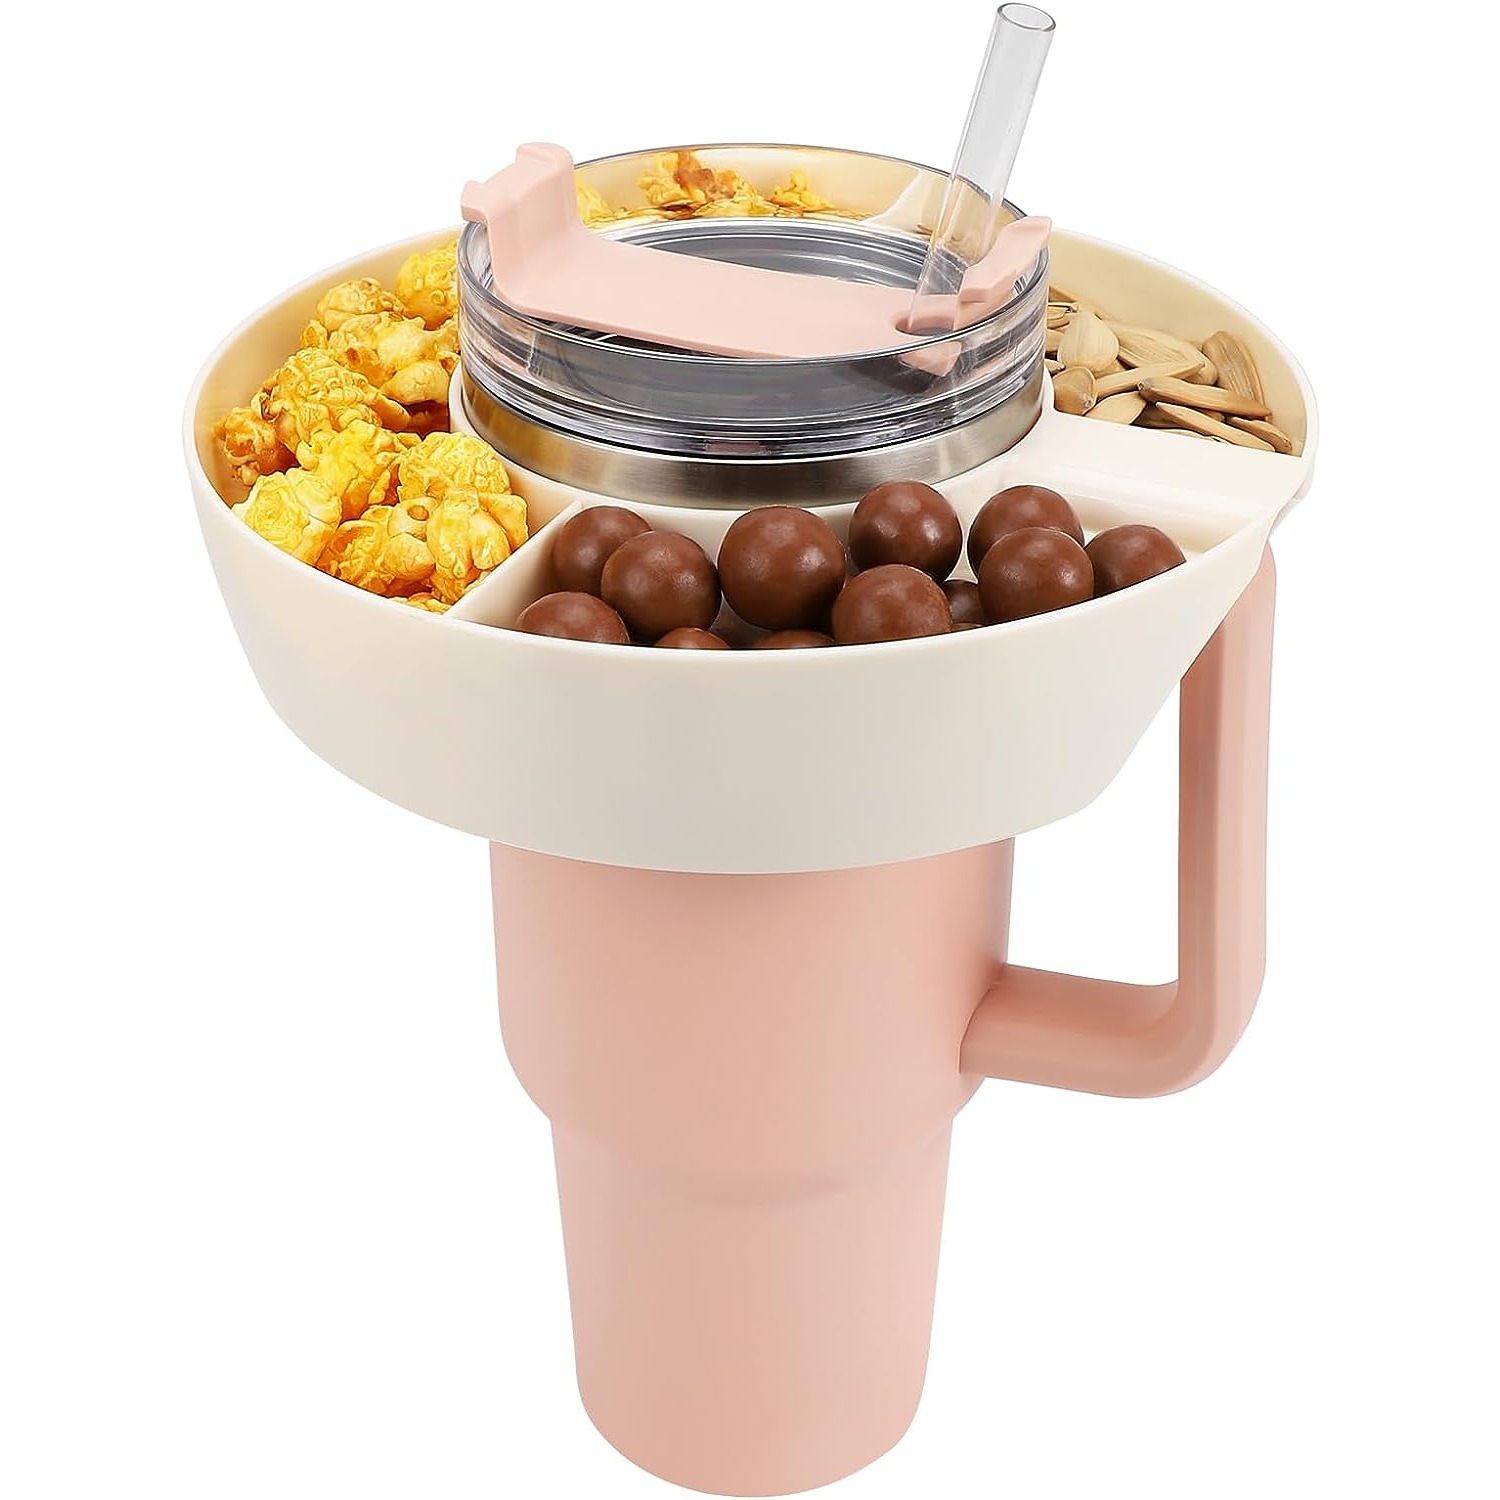 Snack Bowl for Stanley 40 oz Tumbler, Reusable Snack Storage Top Ring Candy  Tray Nuts Platter Containers Box with 4 Compartments for Food Topper Plate